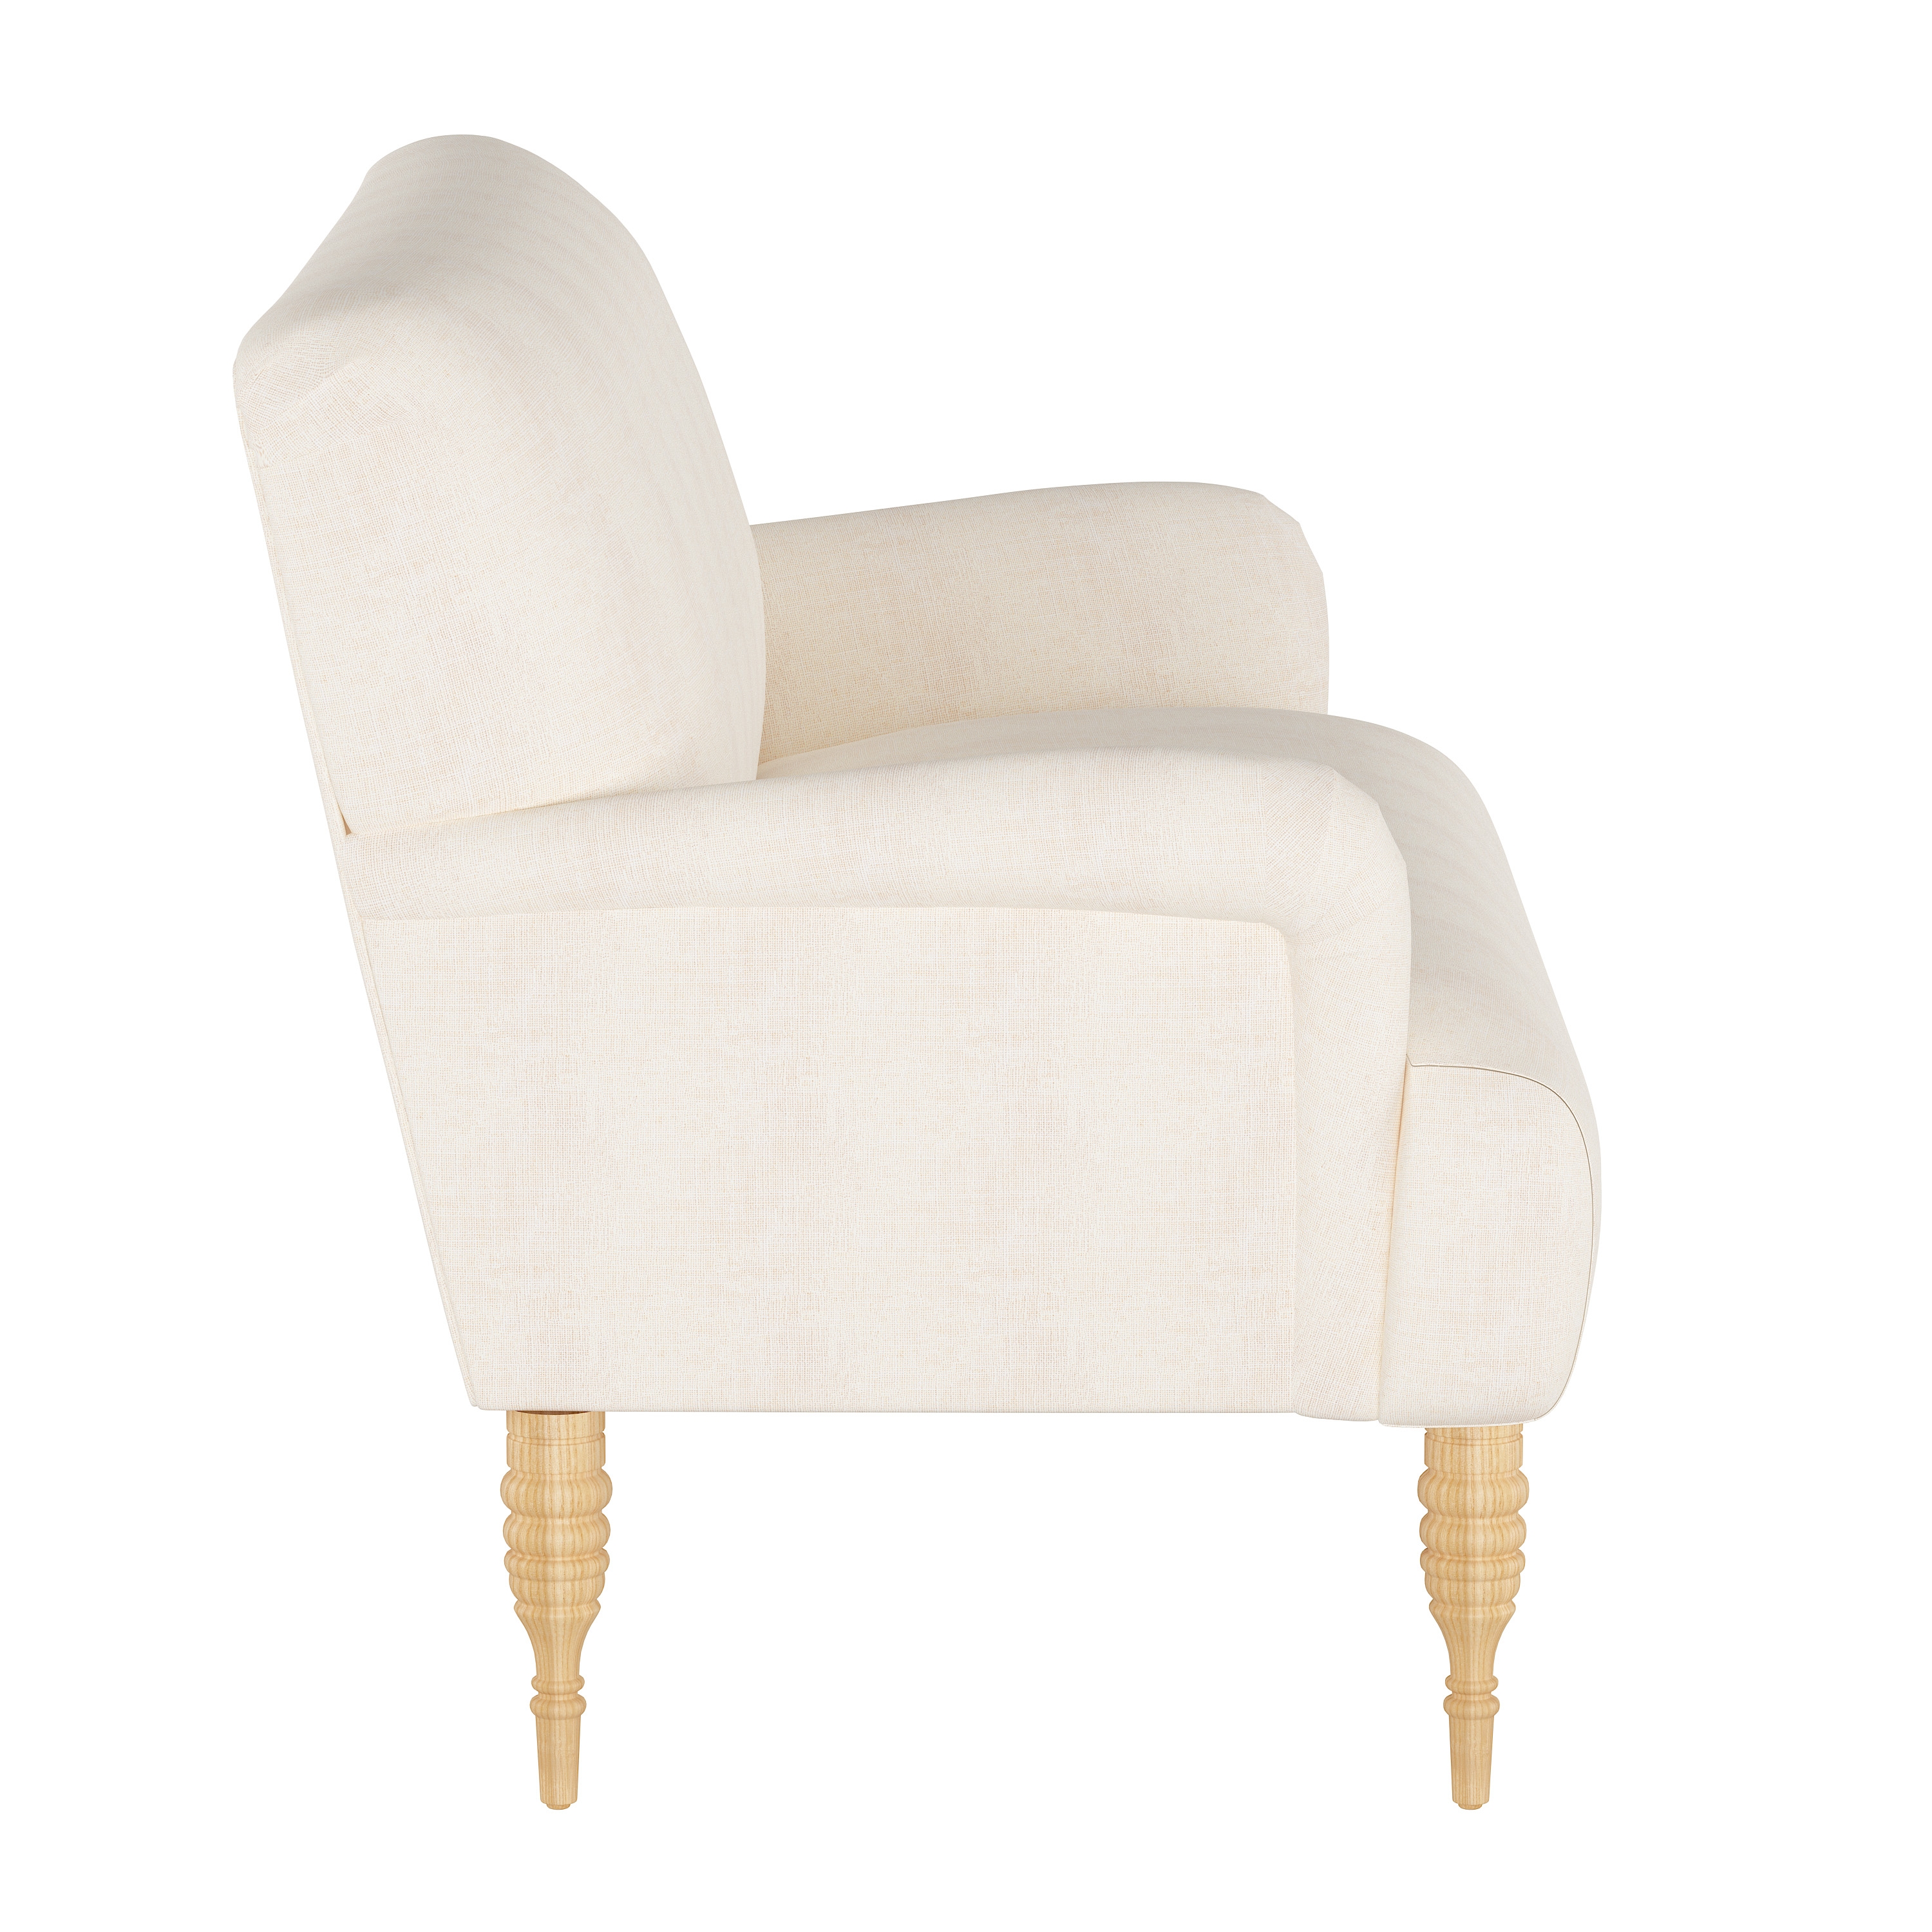 Clermont Settee, White - Image 2